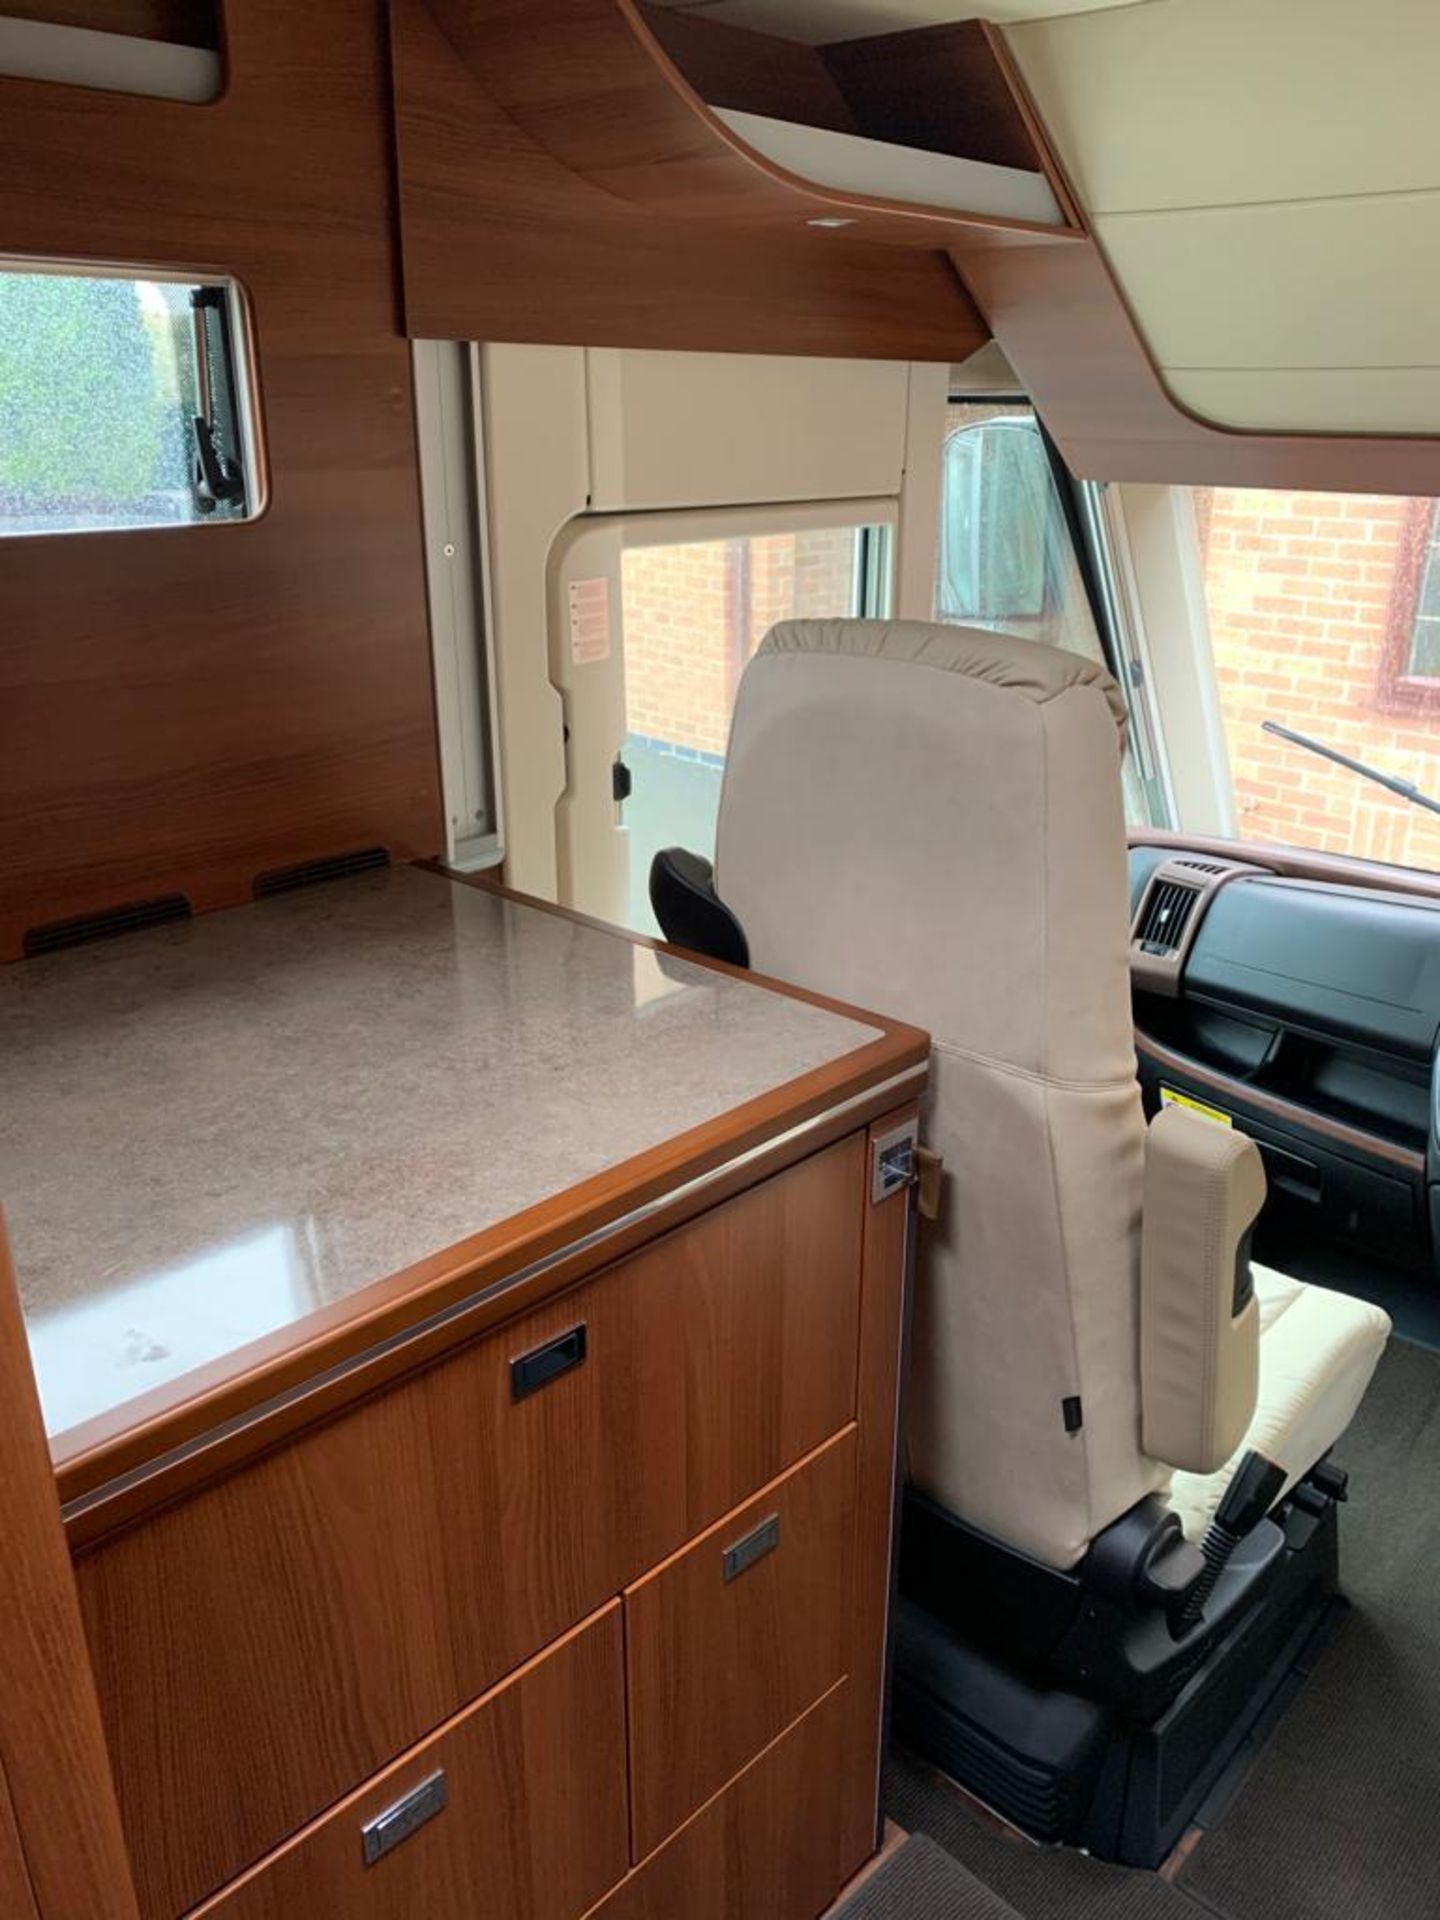 2020 CARTHAGO LINER-FOR-TWO 53L MOTORHOME 11 mths WARRANTY 4529 MILES, MINT CONDITION NO VAT - Image 27 of 38